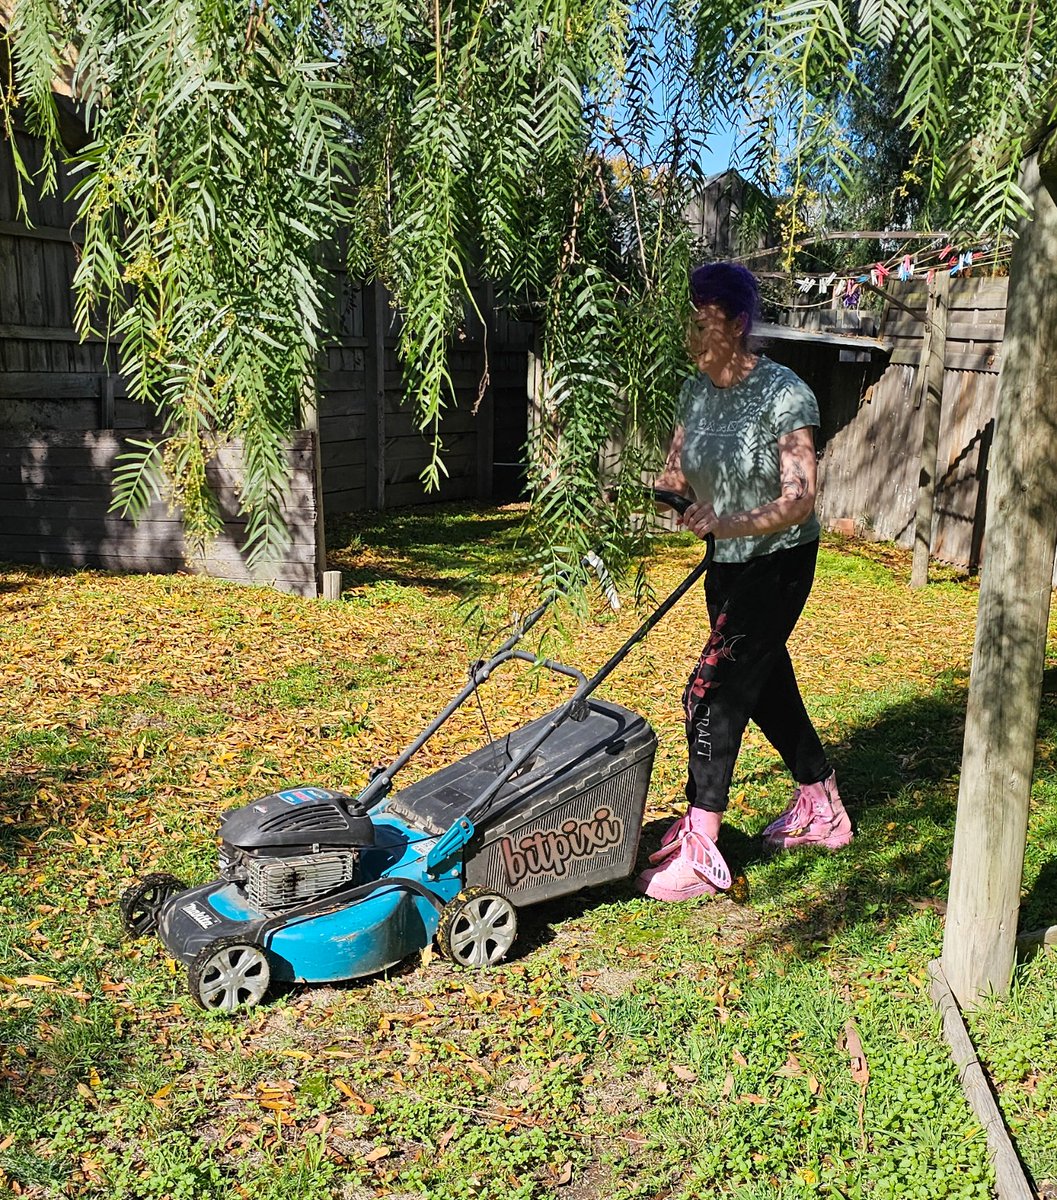 Spied in stealth mode @bitpixi beta-testing her new start-up

@BunkerS3X Lawnmowing services